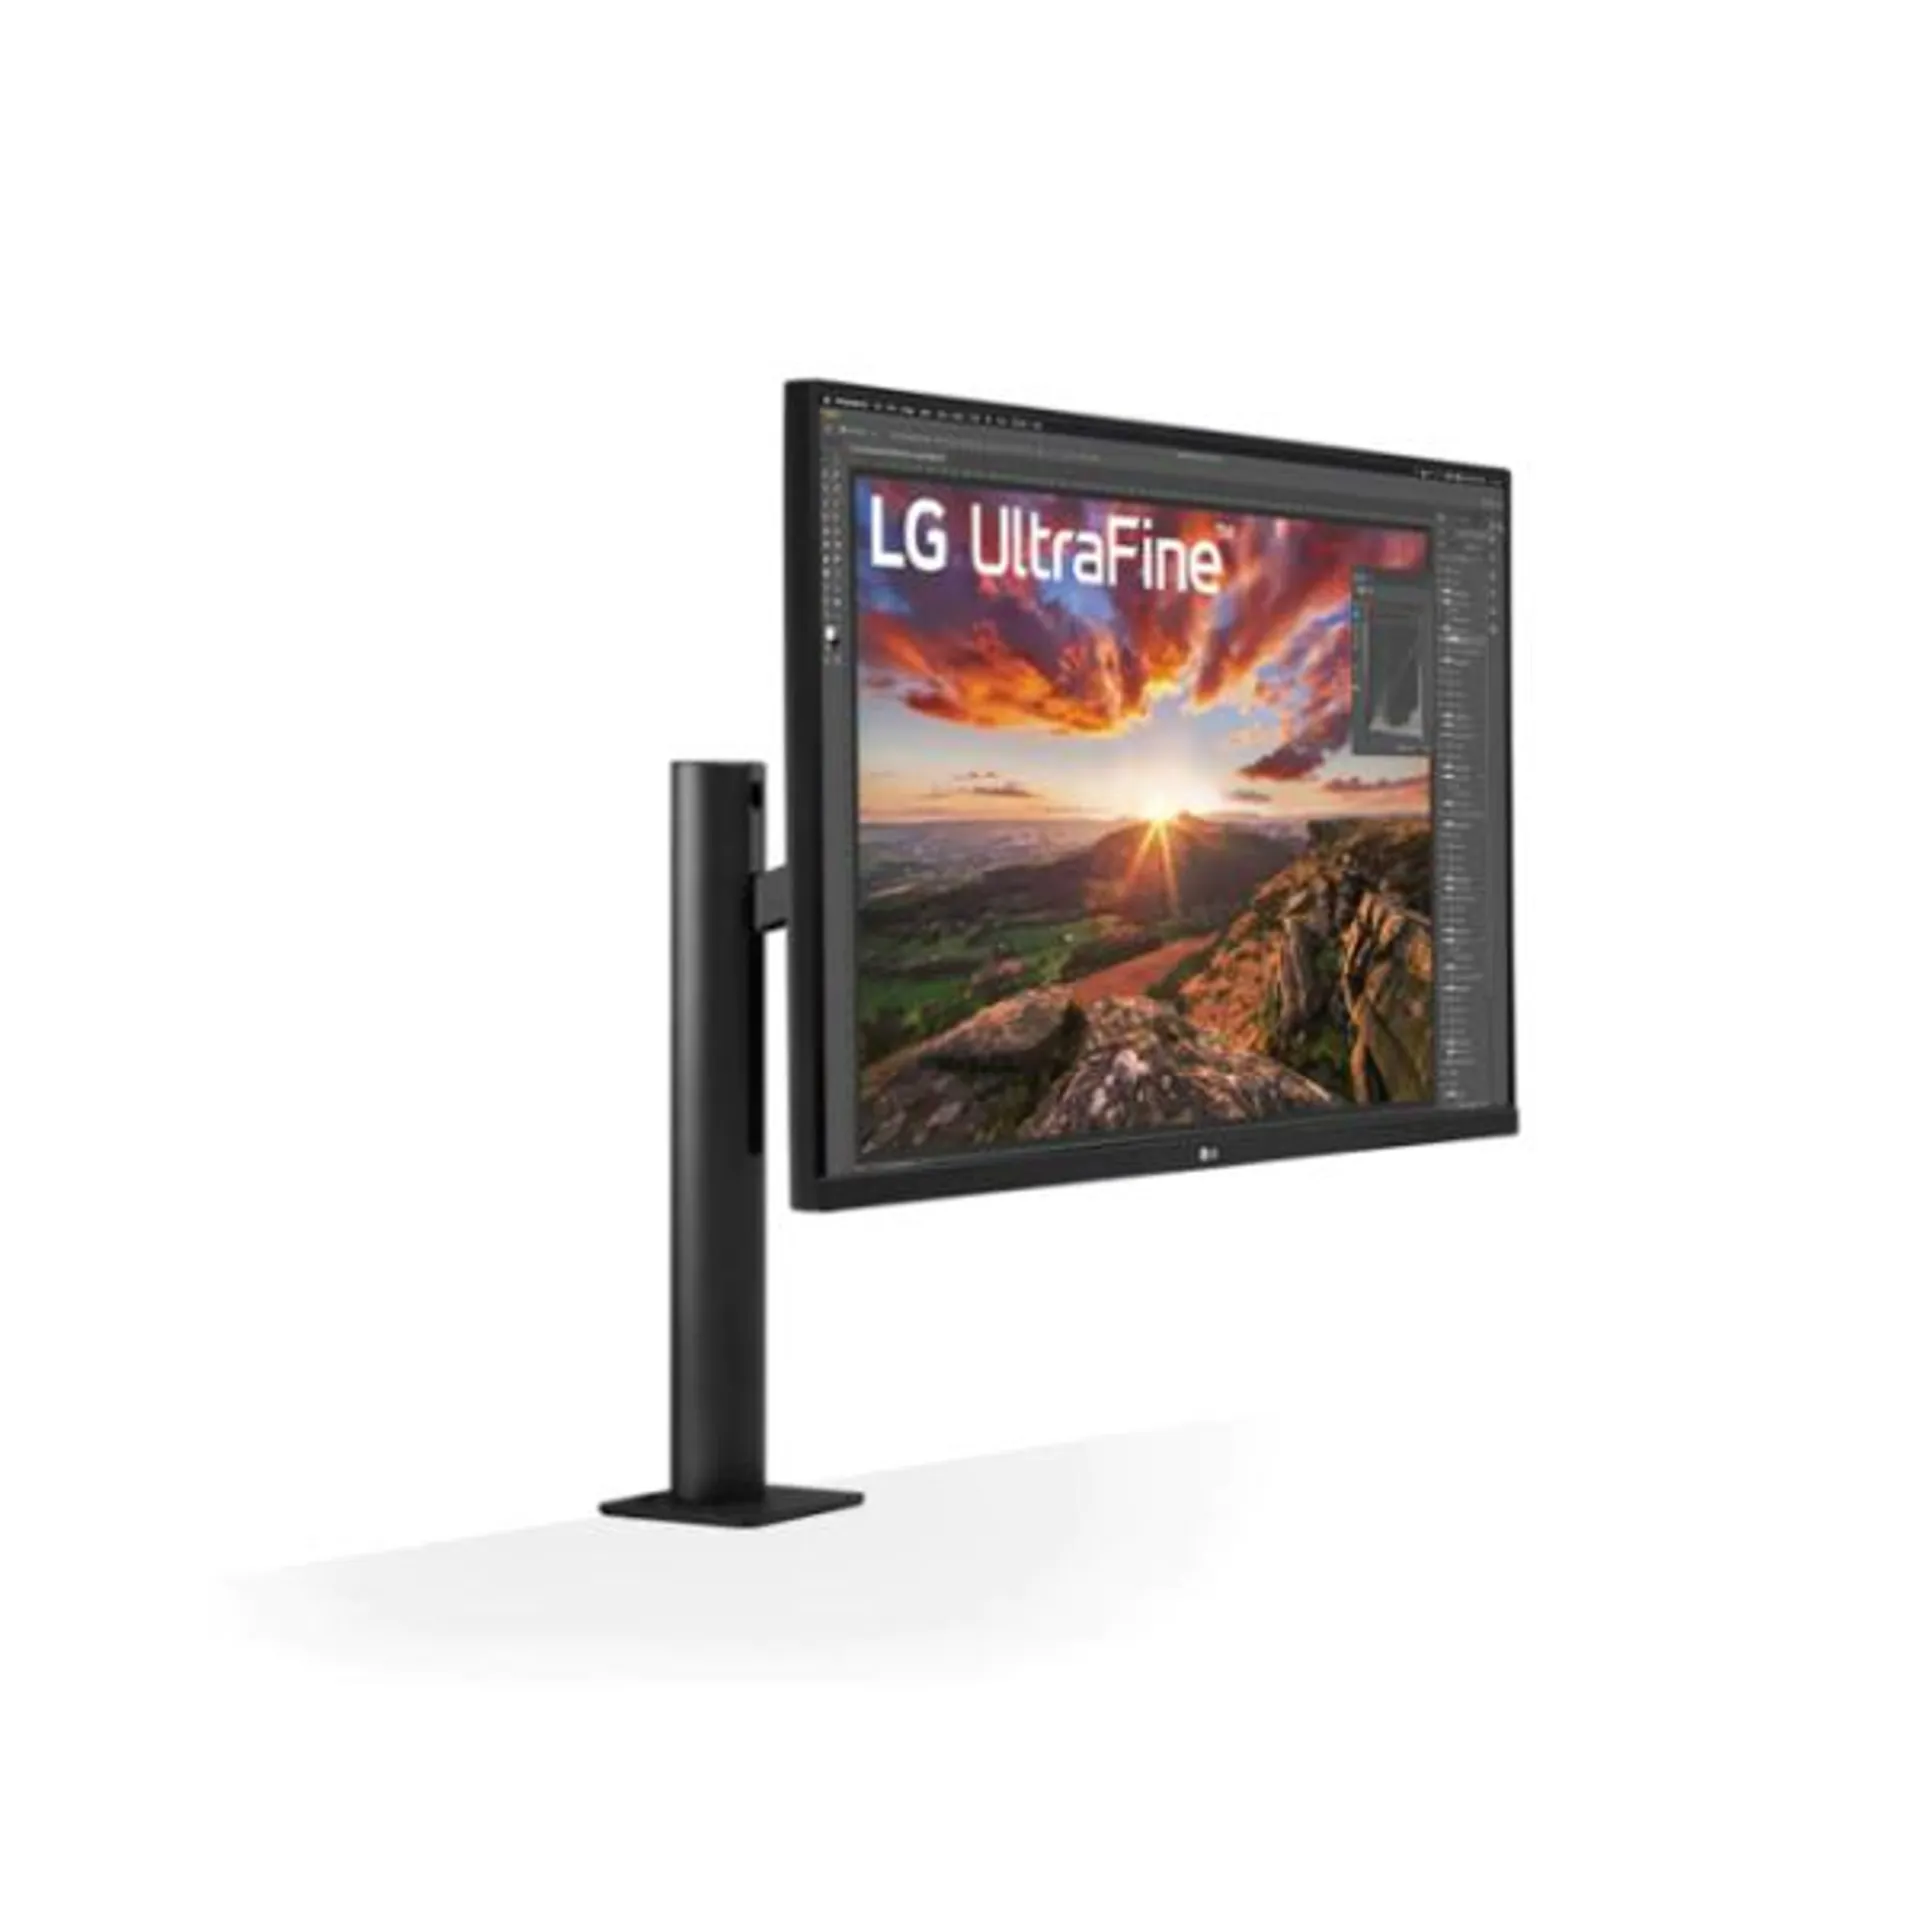 32” Class UltraFine Display Ergo IPS Monitor with HDR10